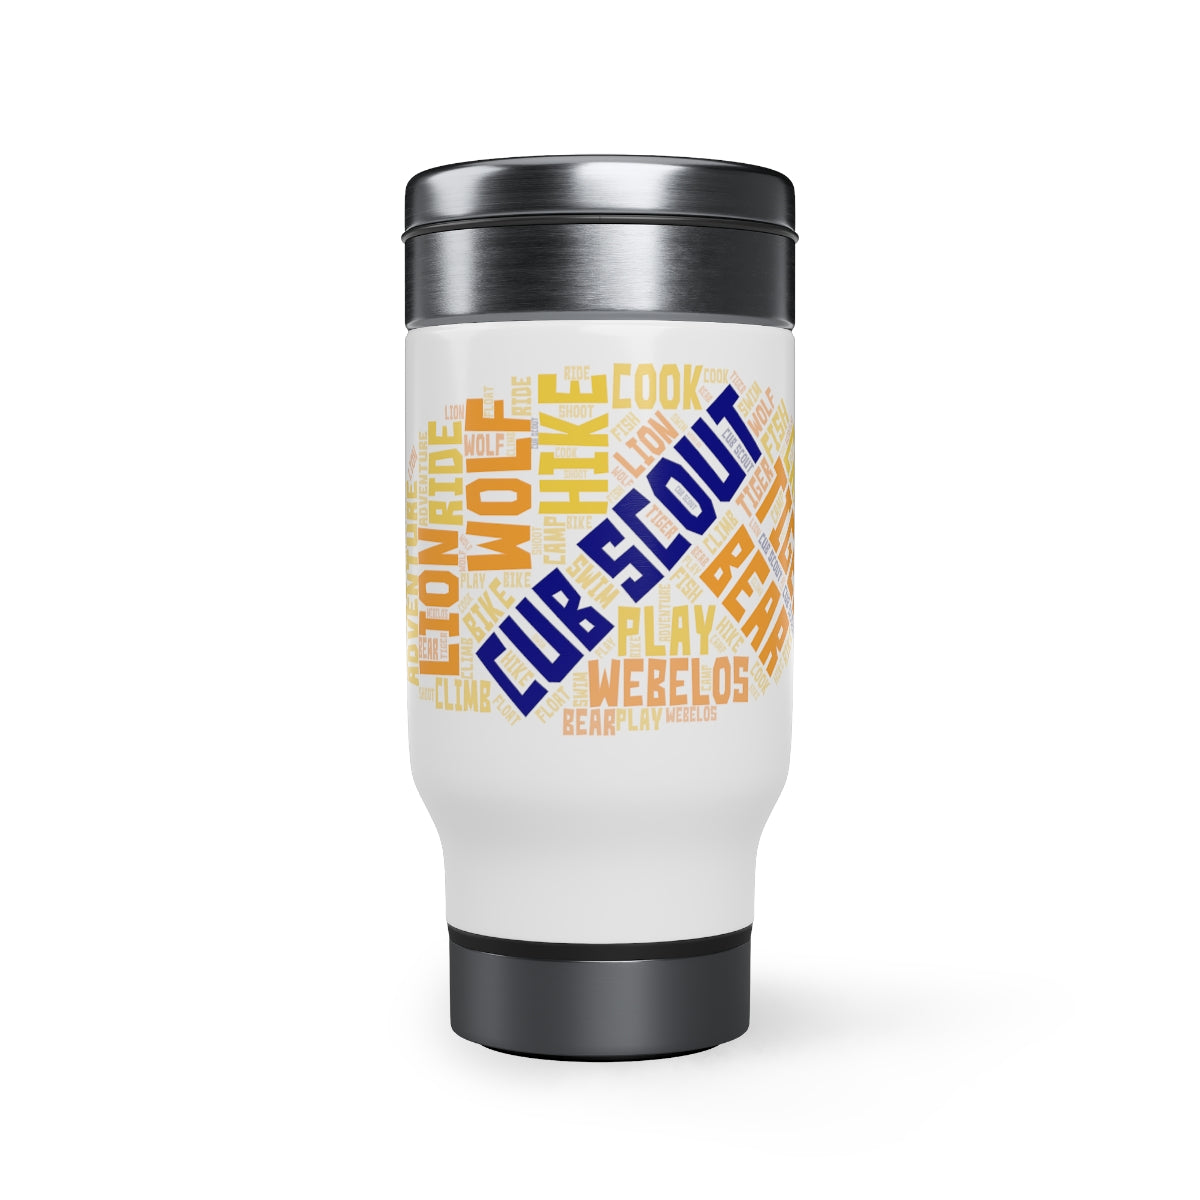 Cub Scout Word Cloud - Stainless Steel Travel Mug with Handle, 14oz